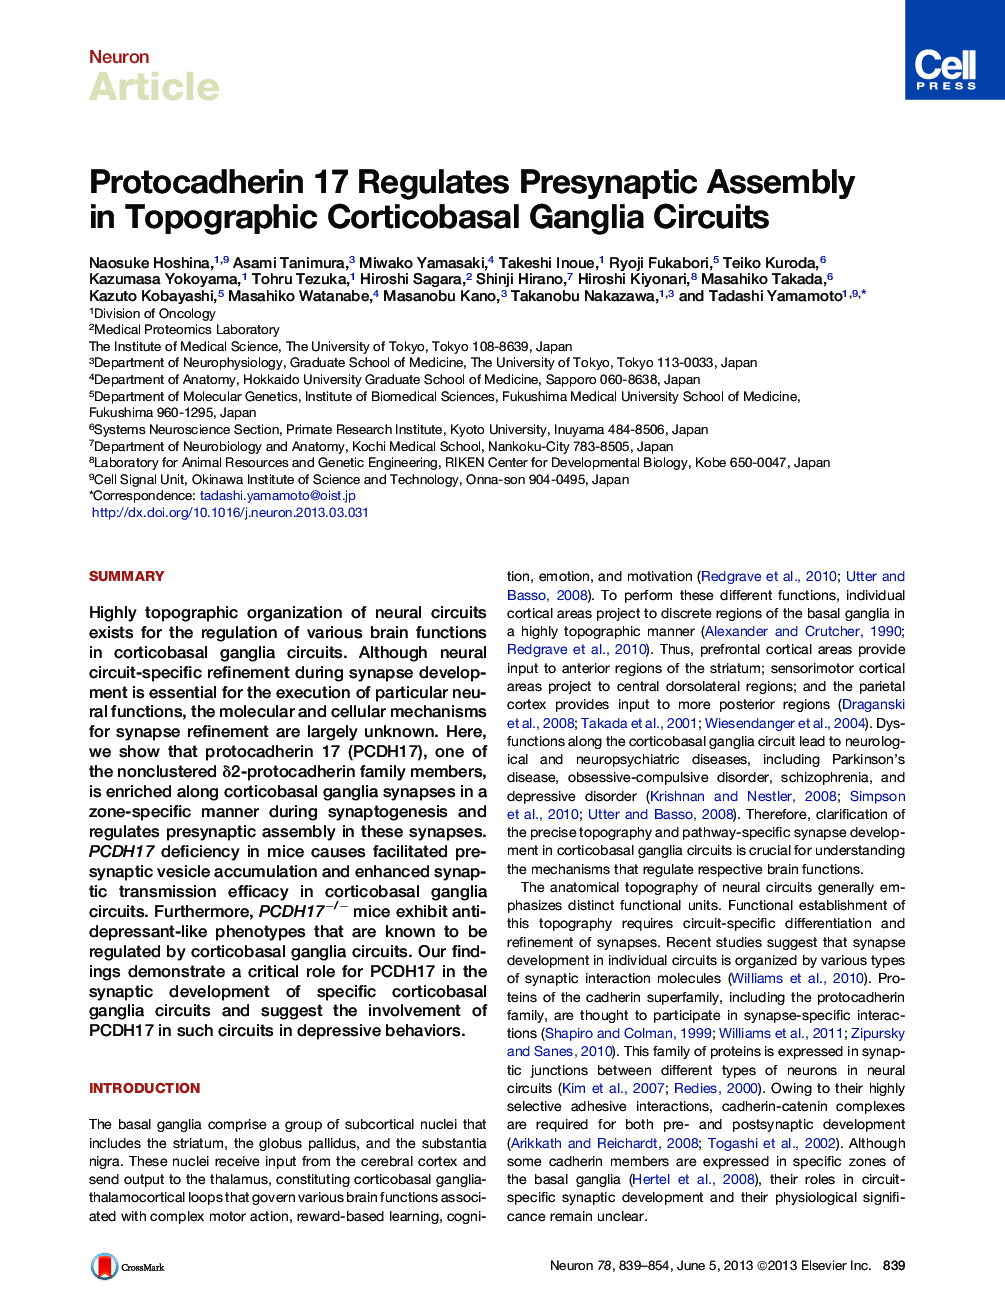 Protocadherin 17 Regulates Presynaptic Assembly in Topographic Corticobasal Ganglia Circuits